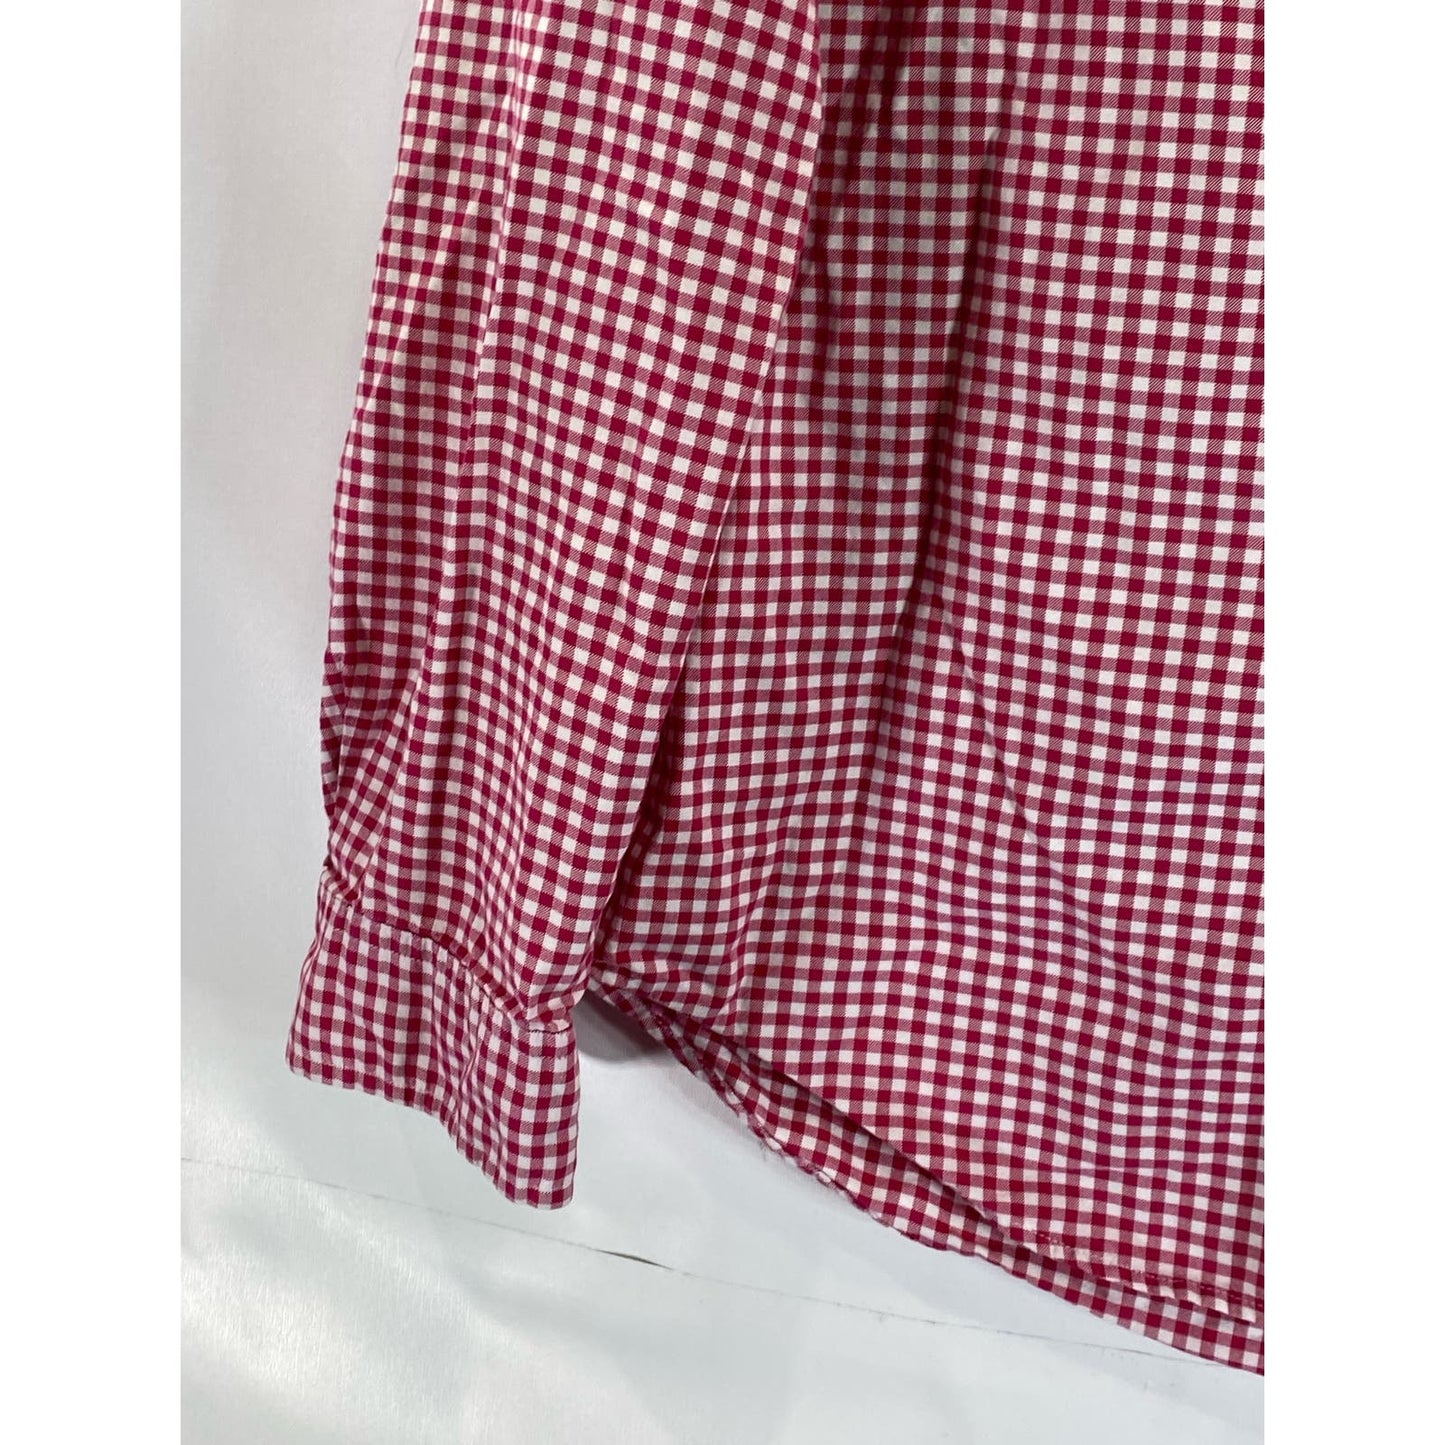 AUTHENTIC J.CREW Men's Red/White Gingham Oxford Slim-Fit Button-Up Shirt SZ M